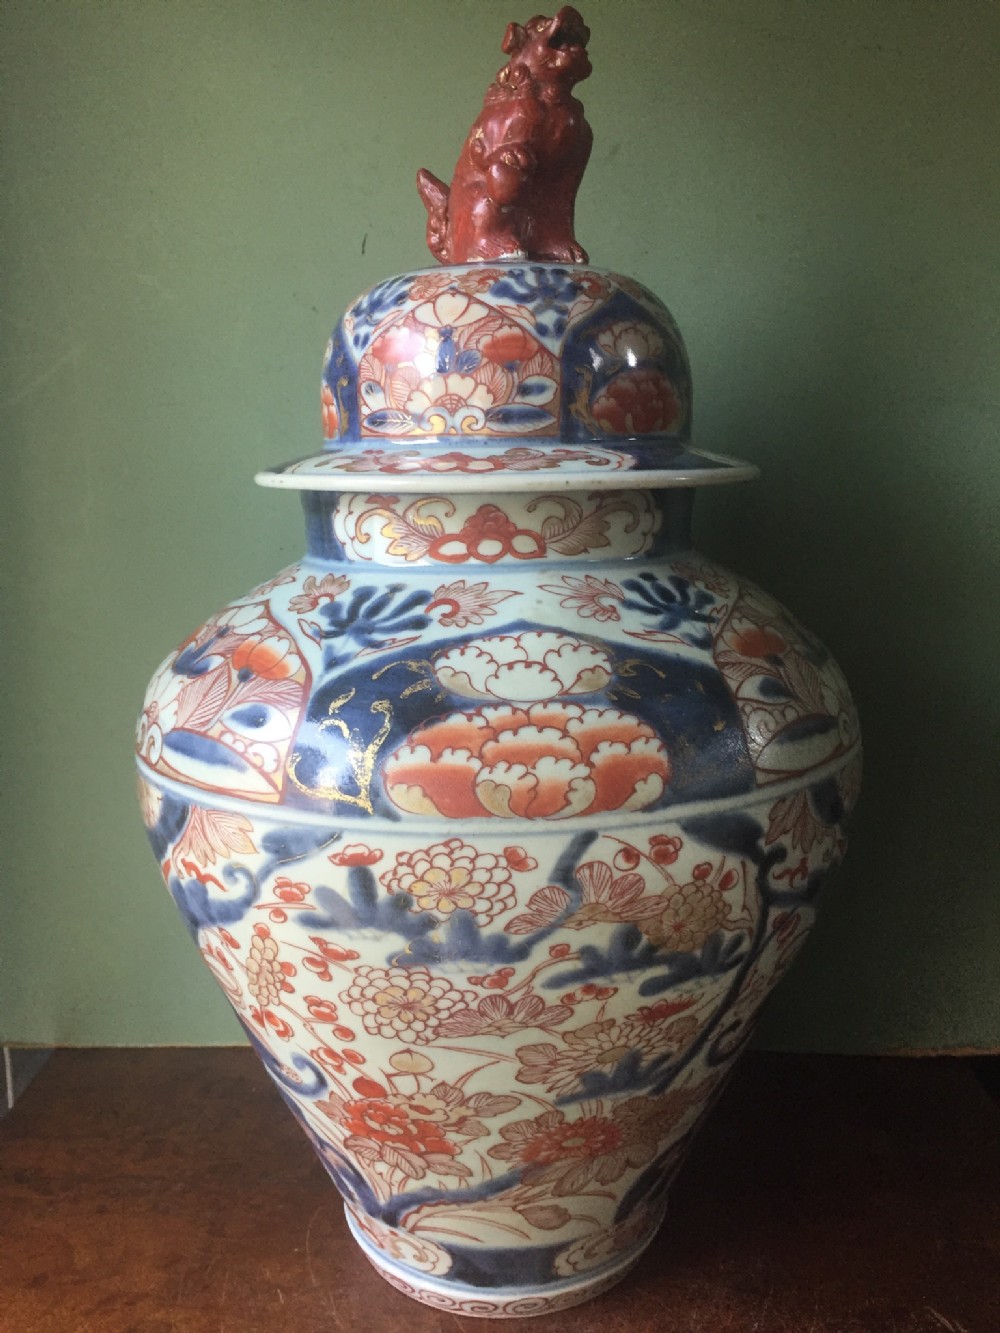 c18th japanese porcelain vase and cover decorated in the imari palette